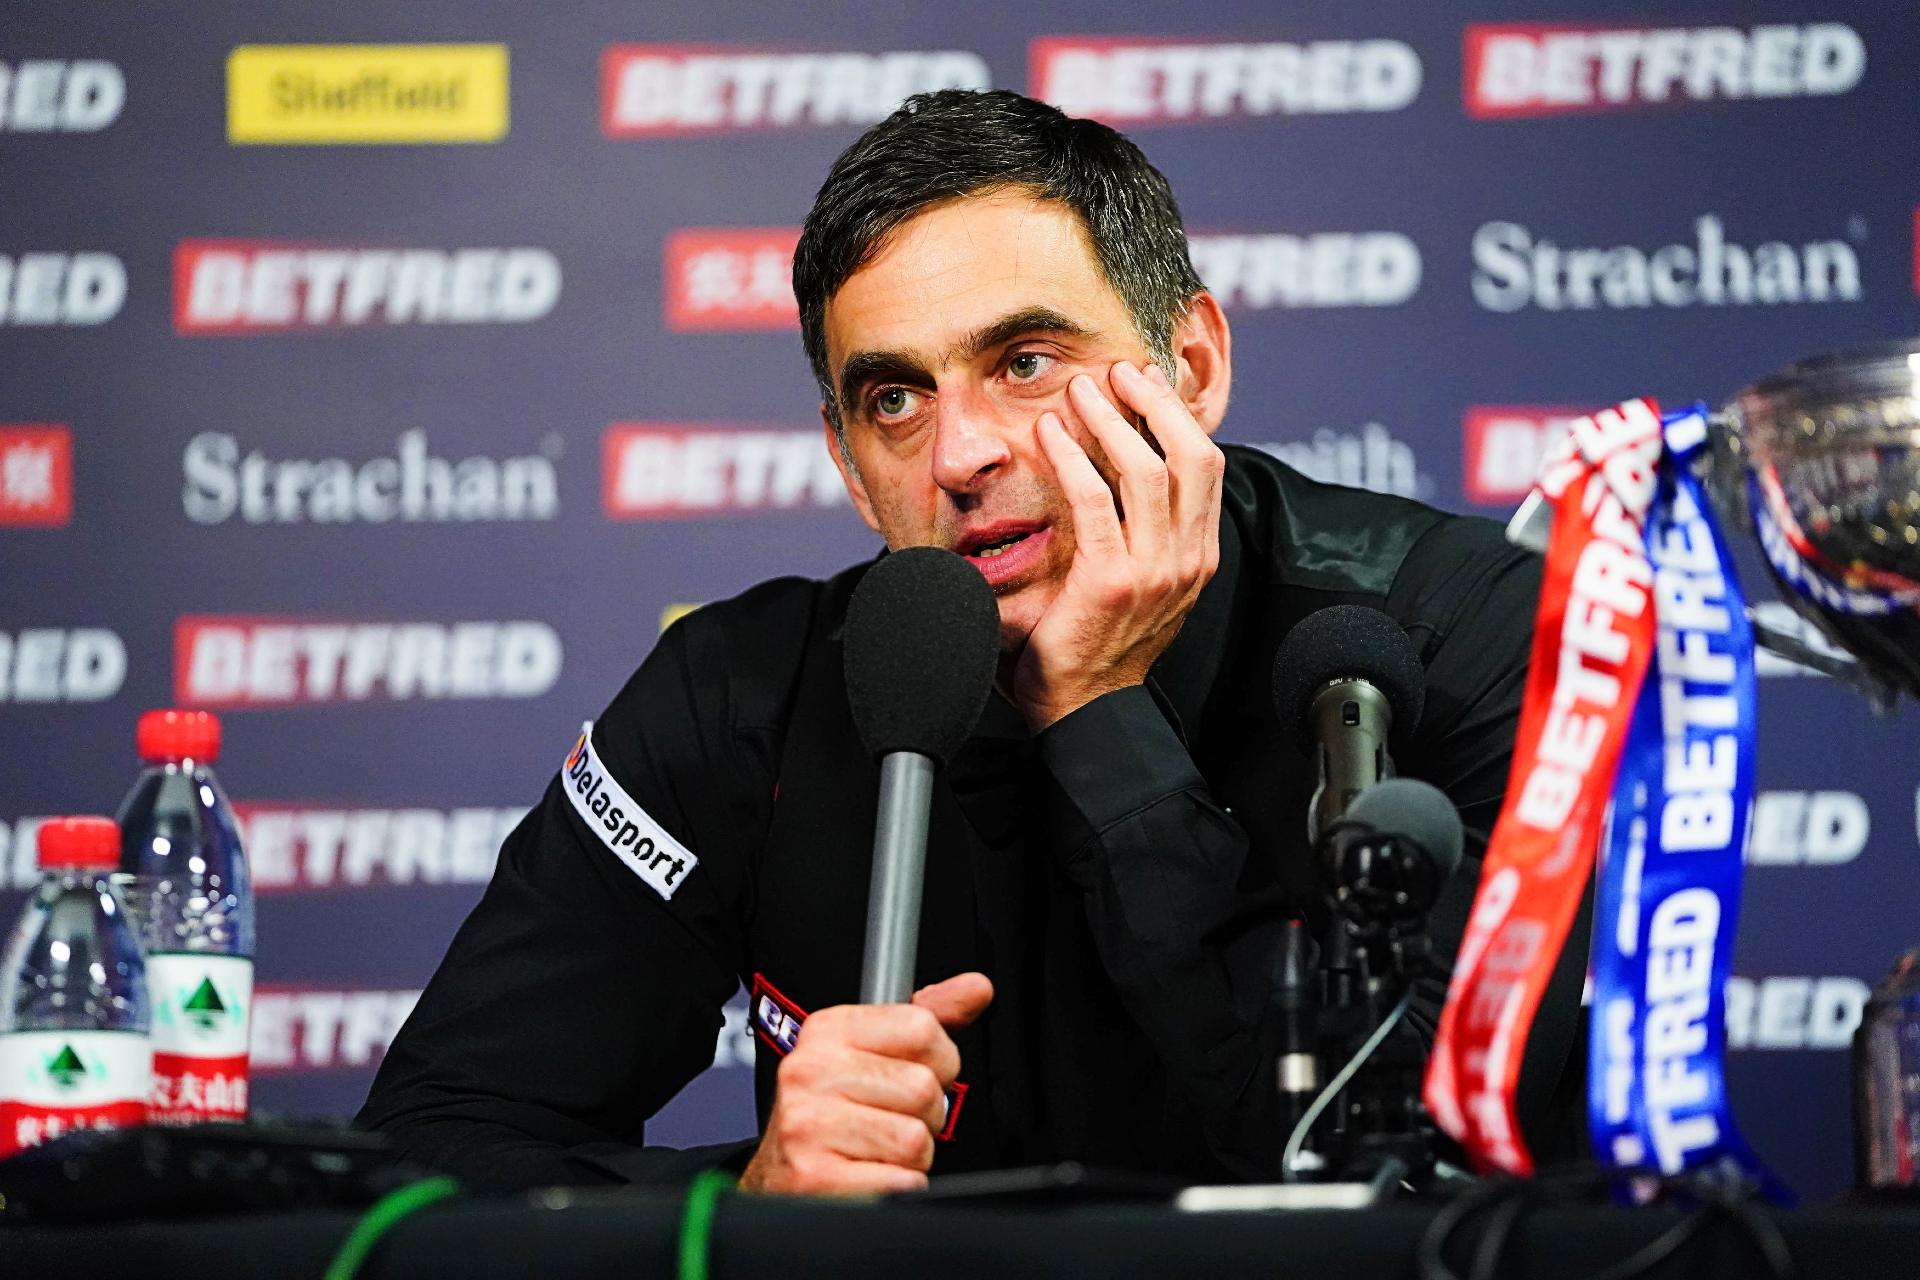 Ronnie O’Sullivan has been blunt in his criticism of the World Snooker Tour